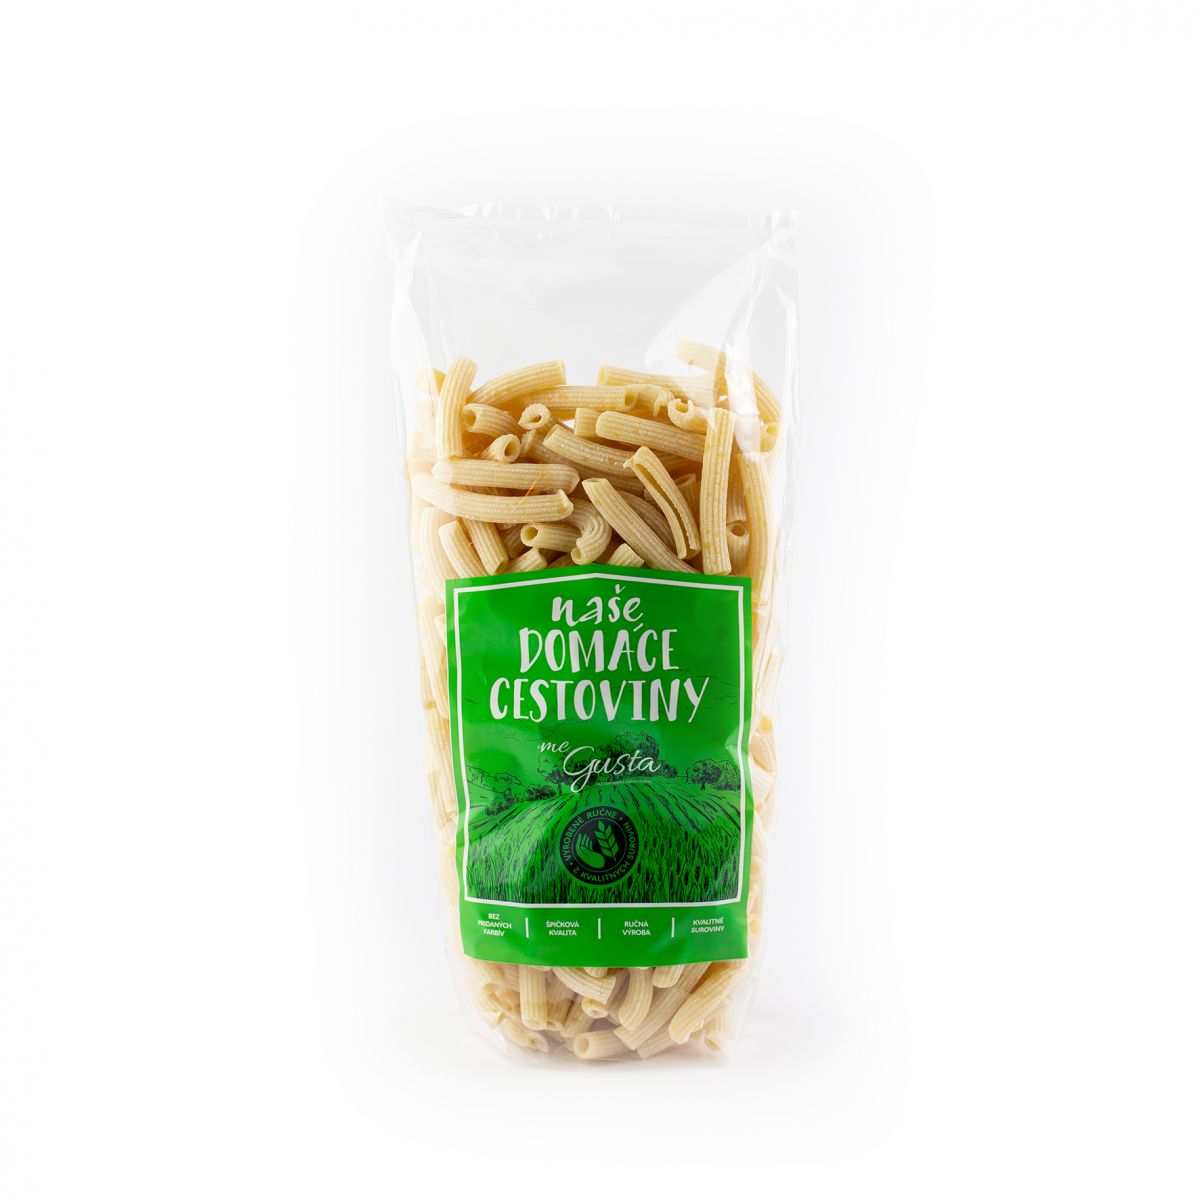 Penne 500 g